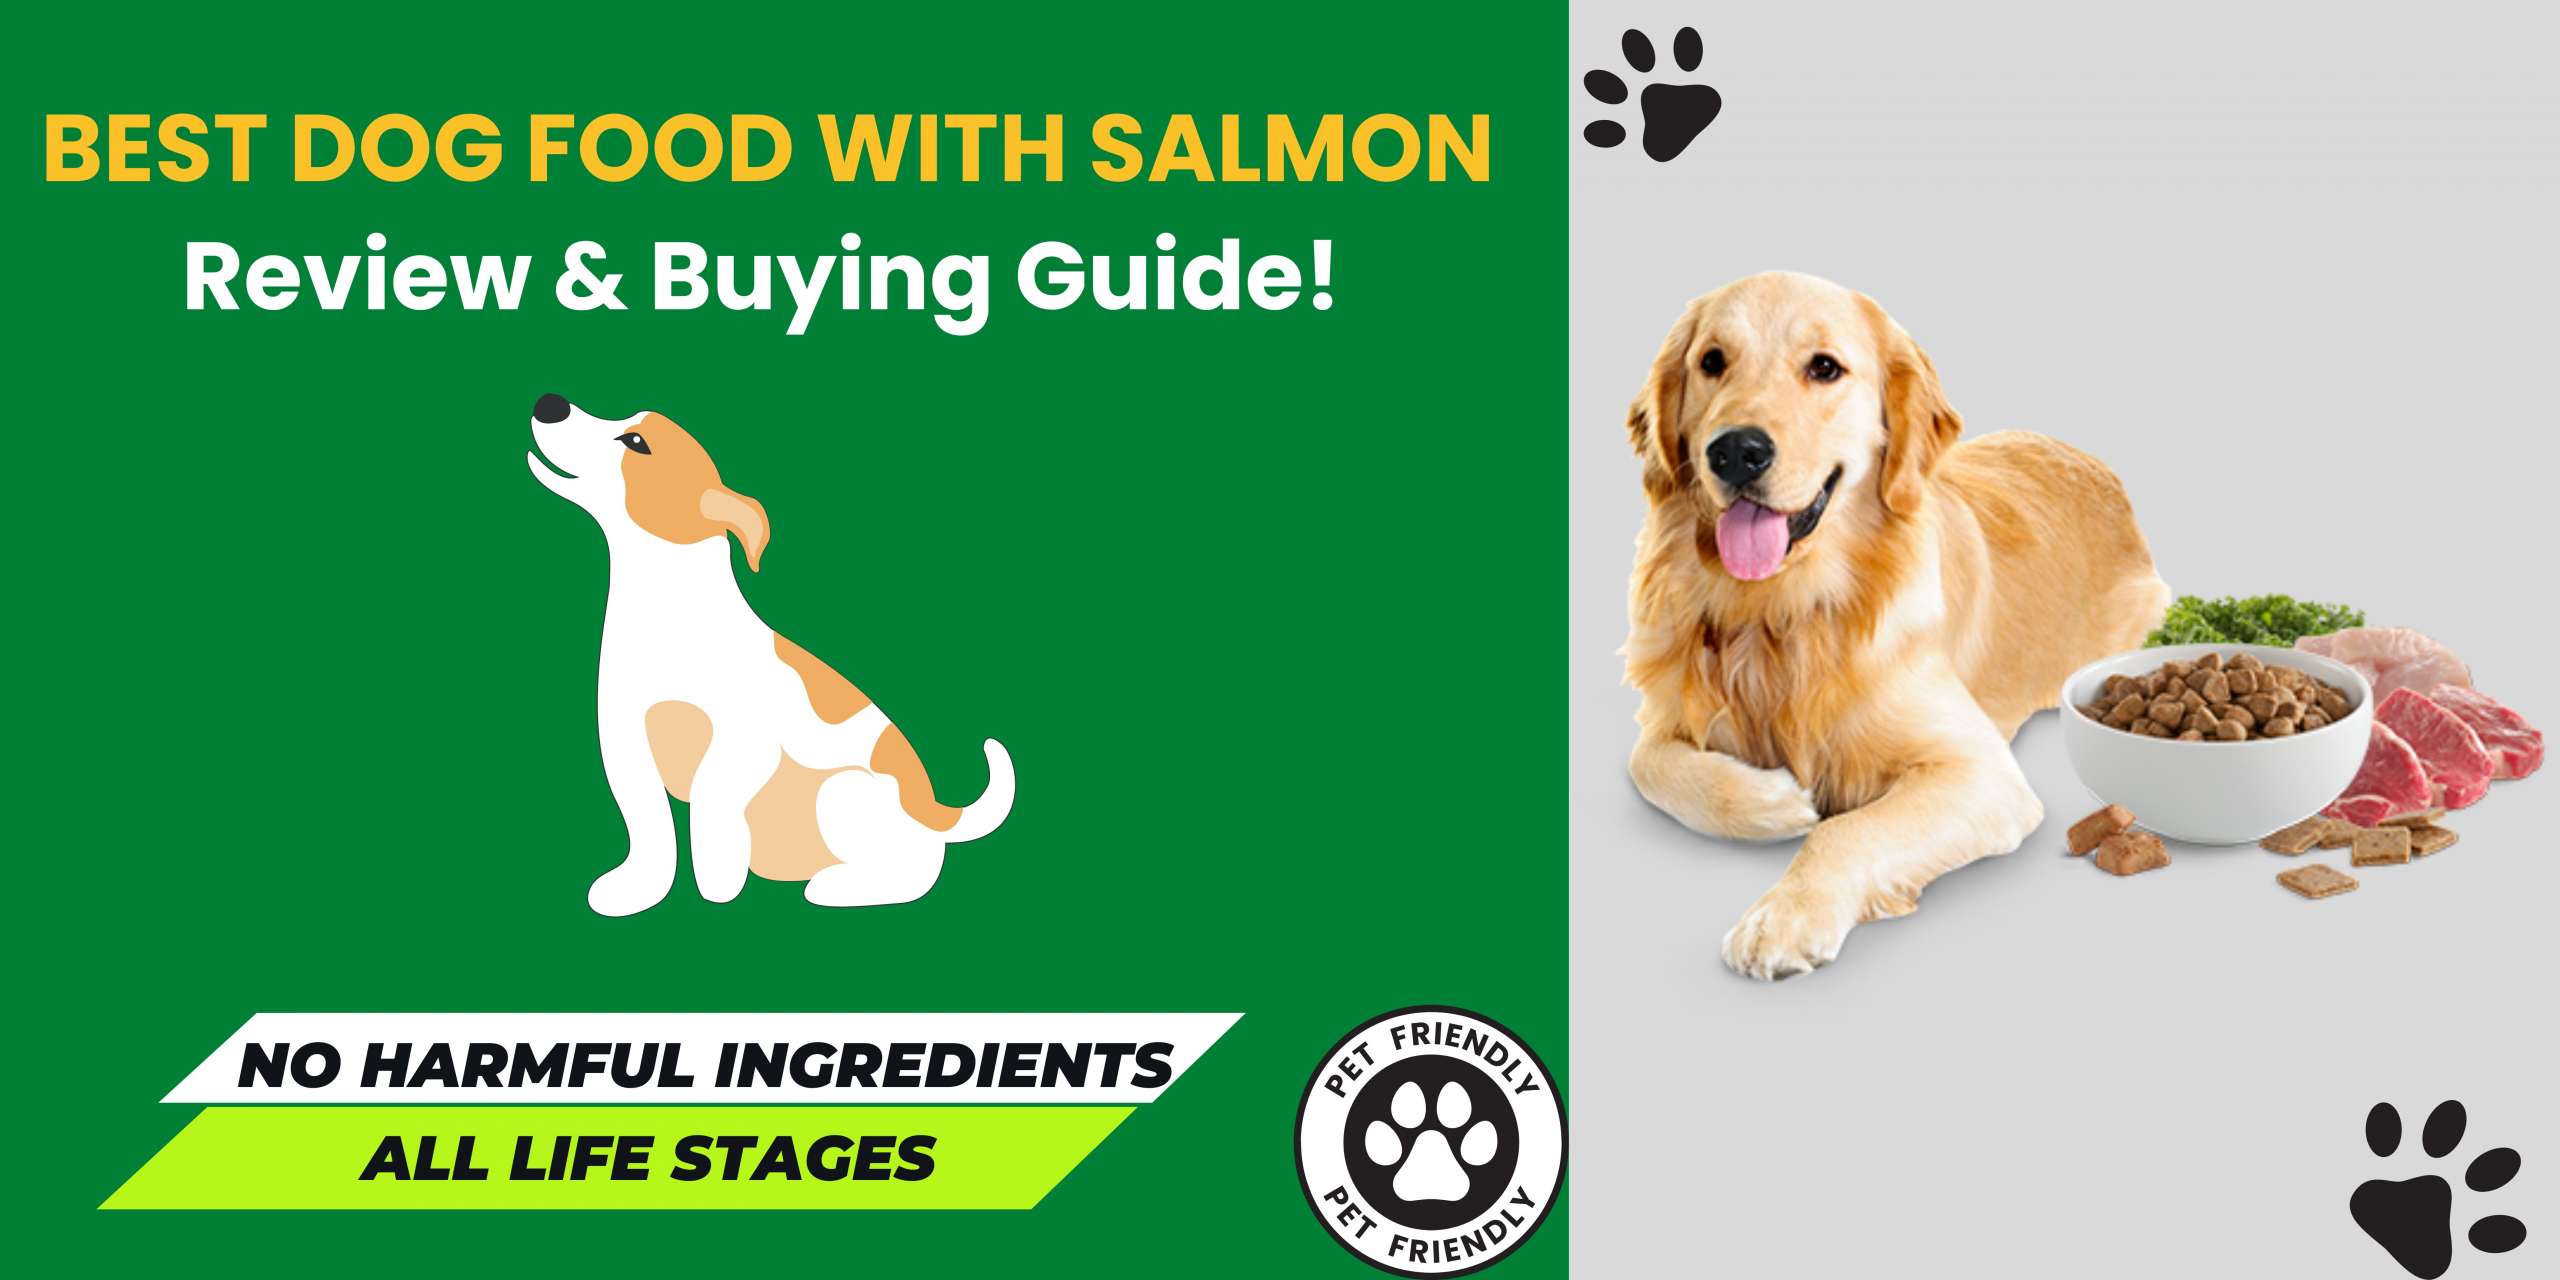 We review the Best Dog Food with Salmon